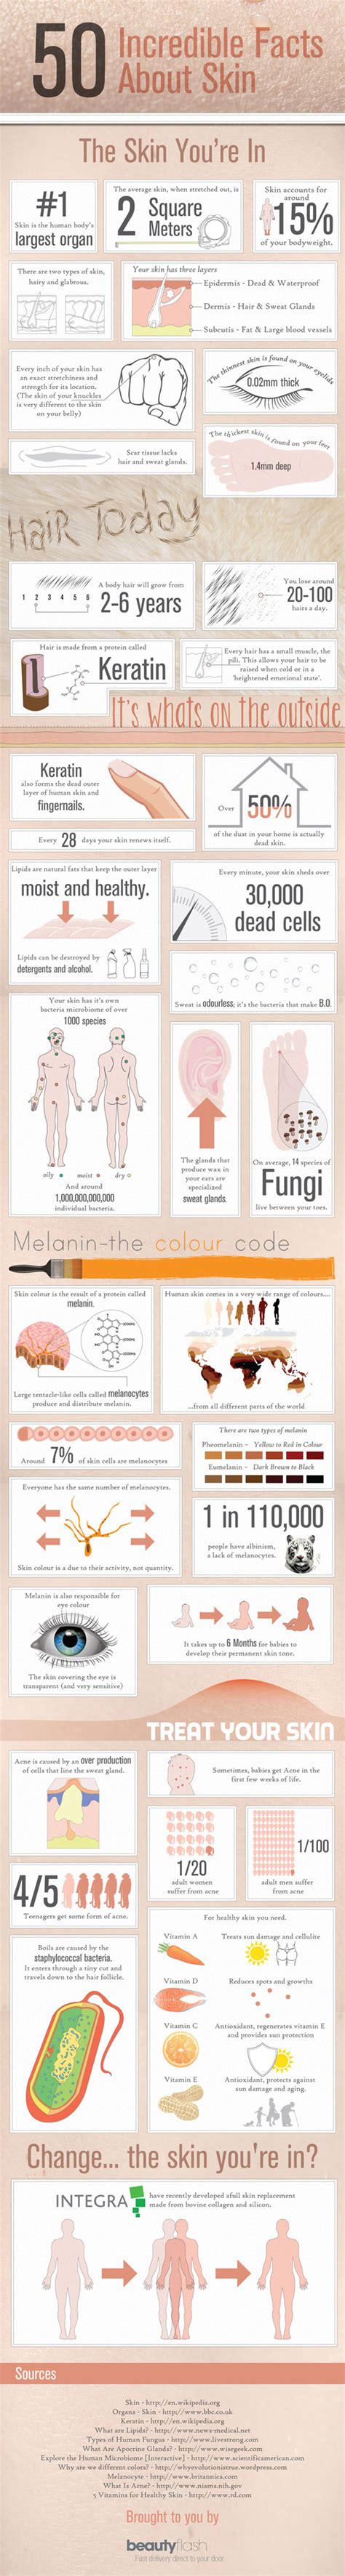 Skin Facts Here Are 50 Incredible Ones Infographic Ct Dermatology